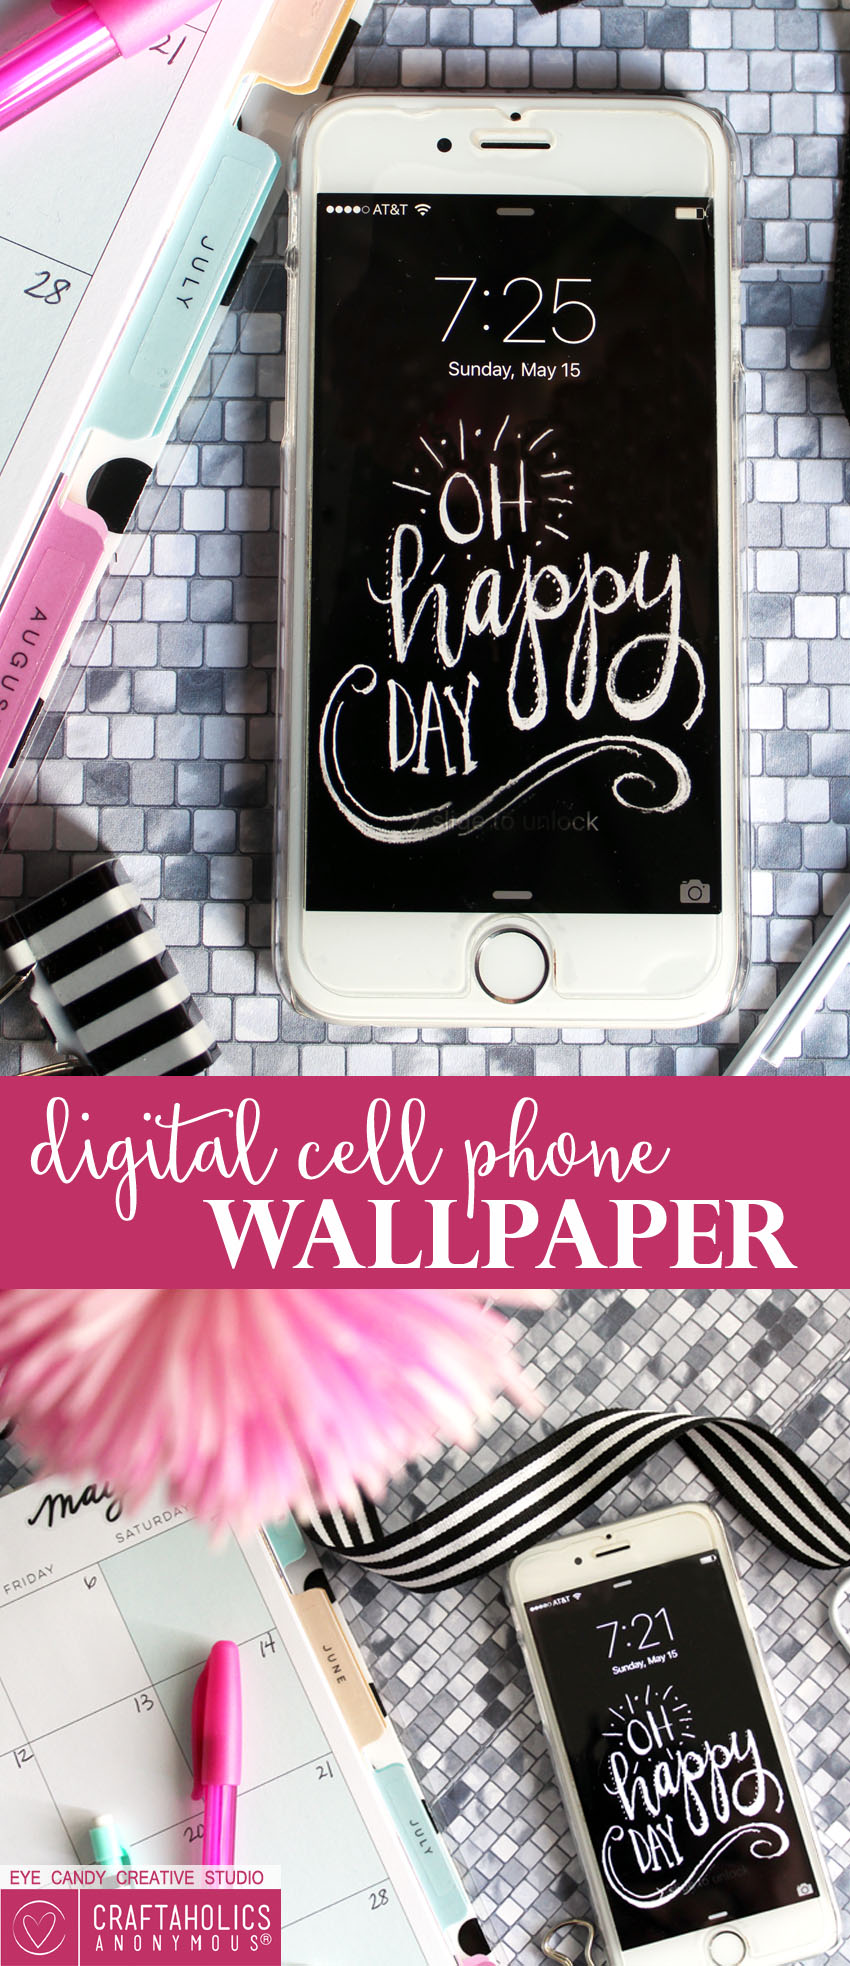 Download This Free Cellphone Wallpaper For A Daily - October - HD Wallpaper 